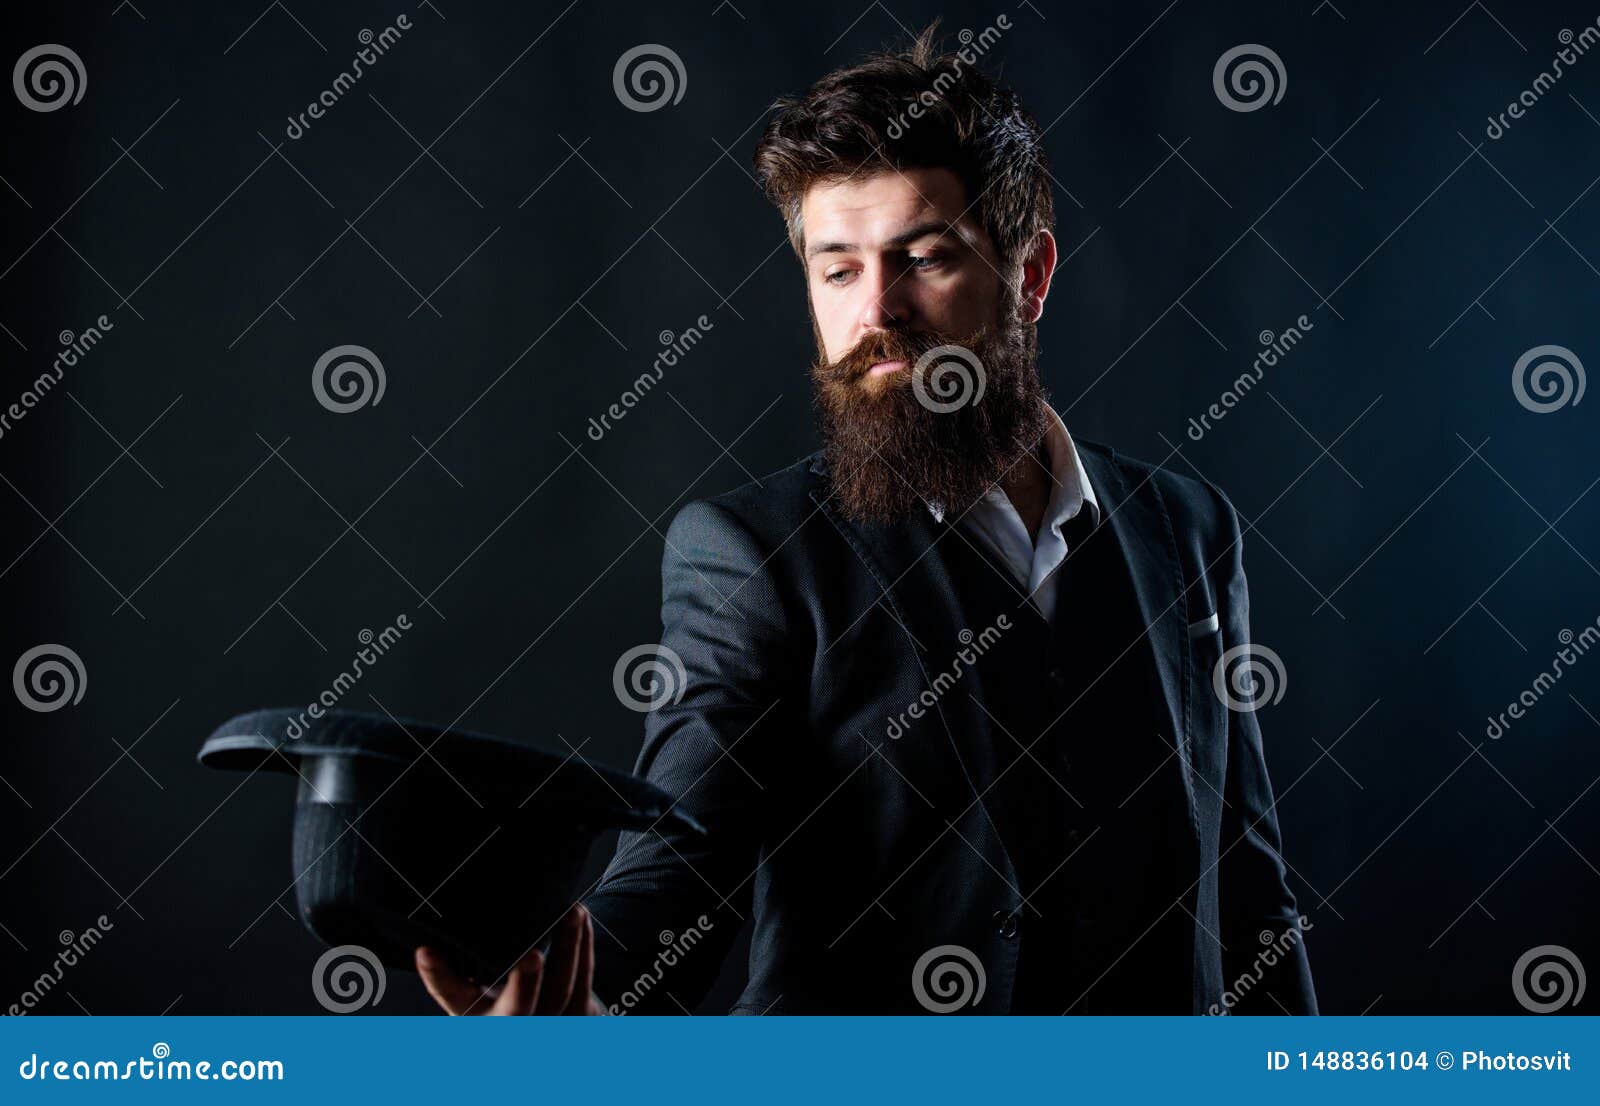 Foto de Elegant and stylish hipster. Retro fashion hat. Man with hat.  Vintage fashion. Man well groomed bearded gentleman on dark background.  Male fashion and menswear. Formal suit classic style outfit do